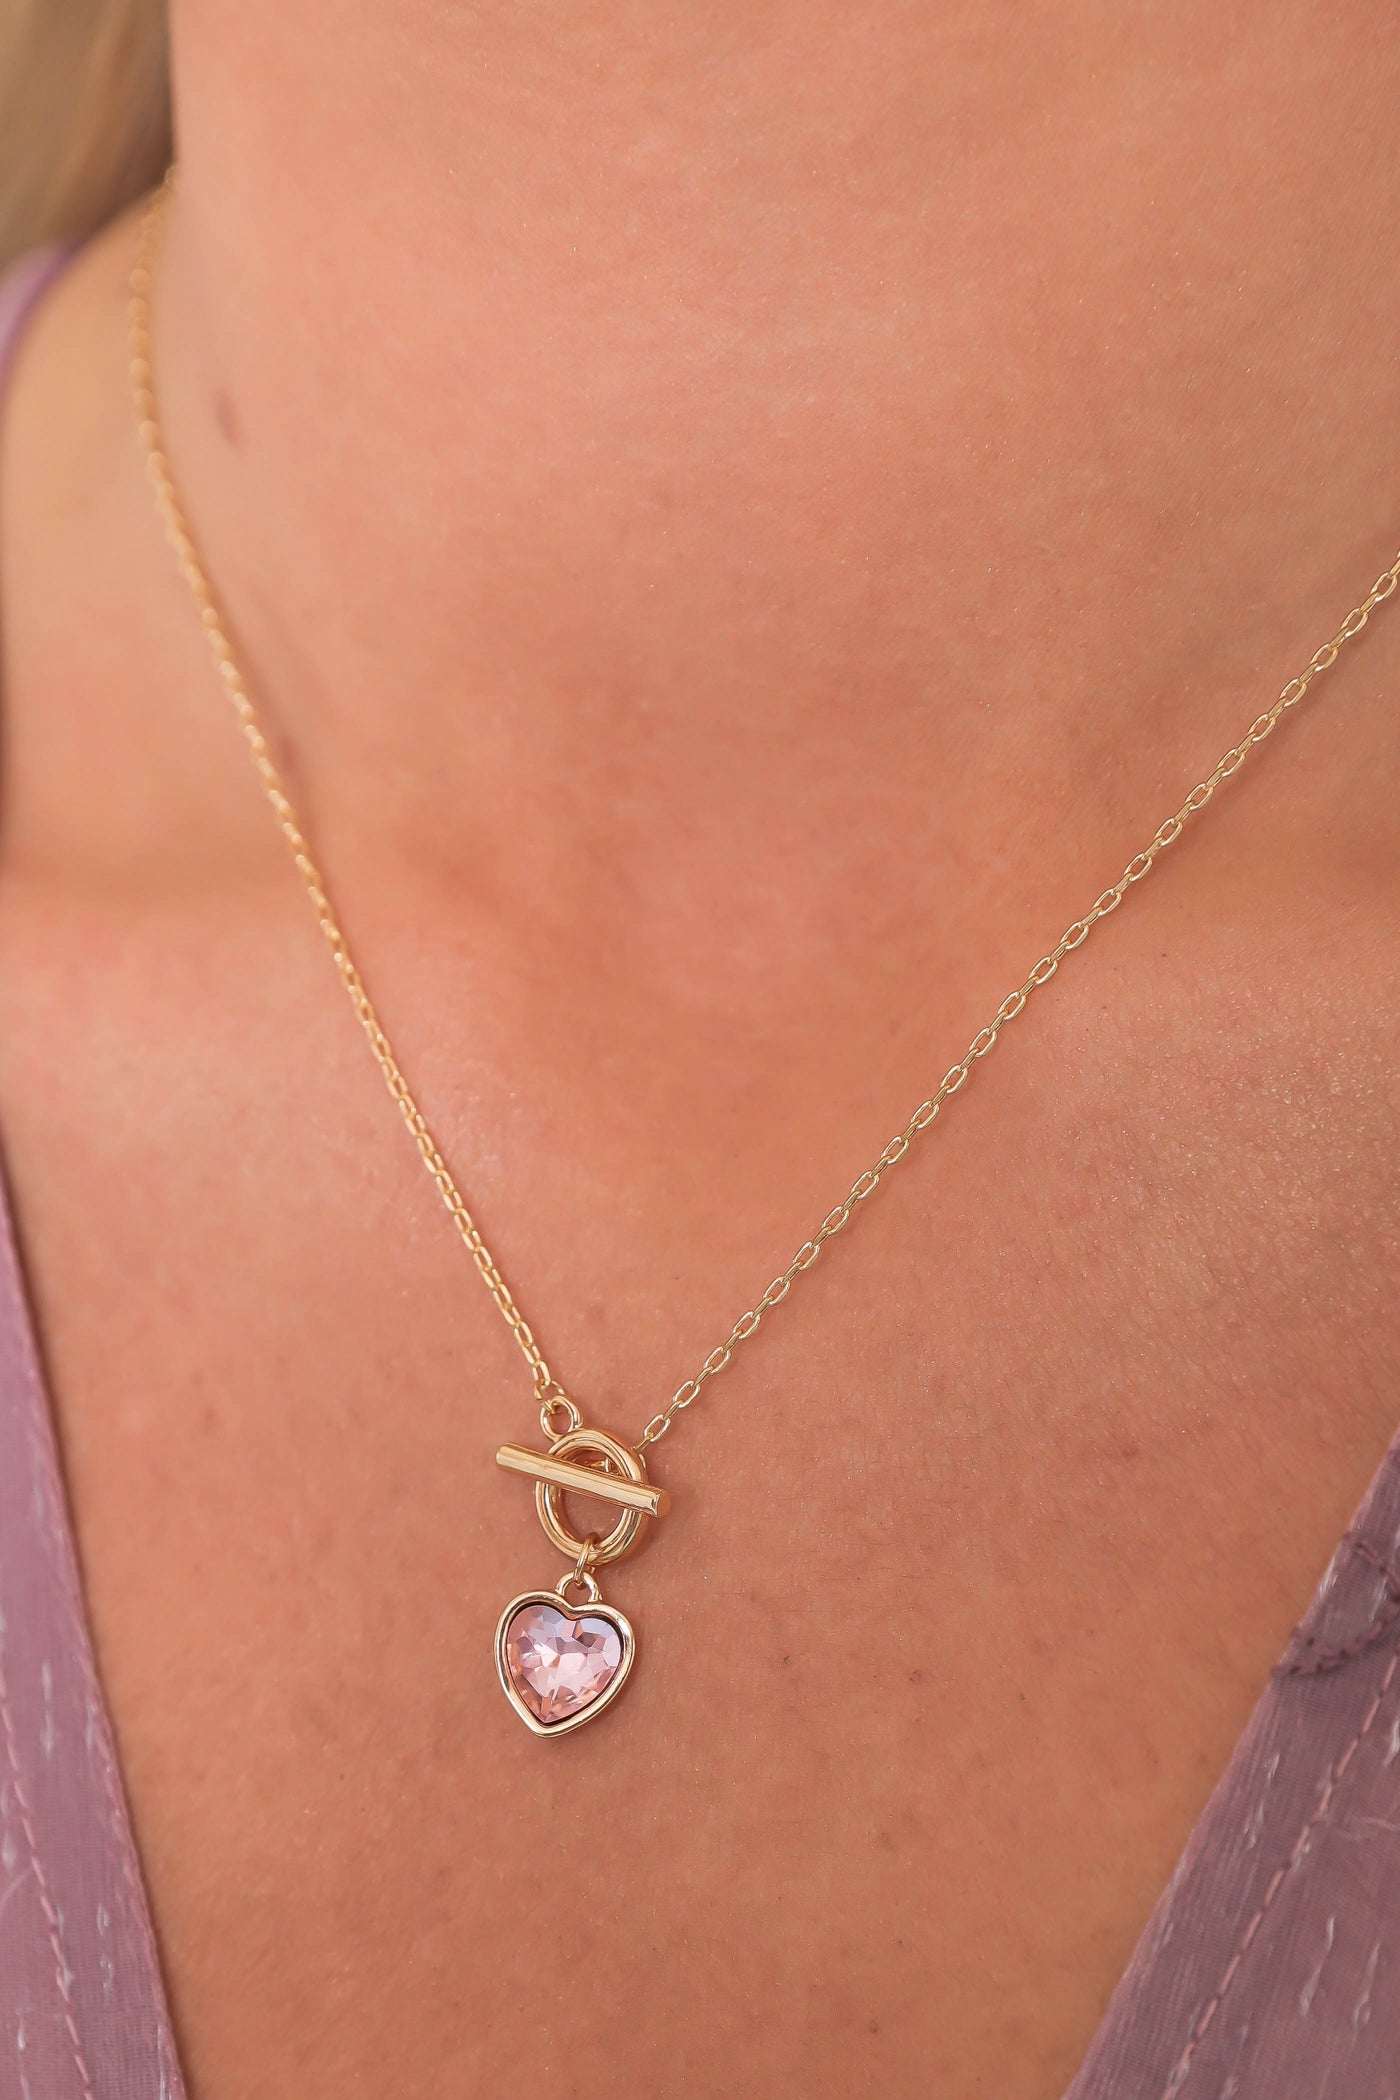 Blissfully in Love Necklace